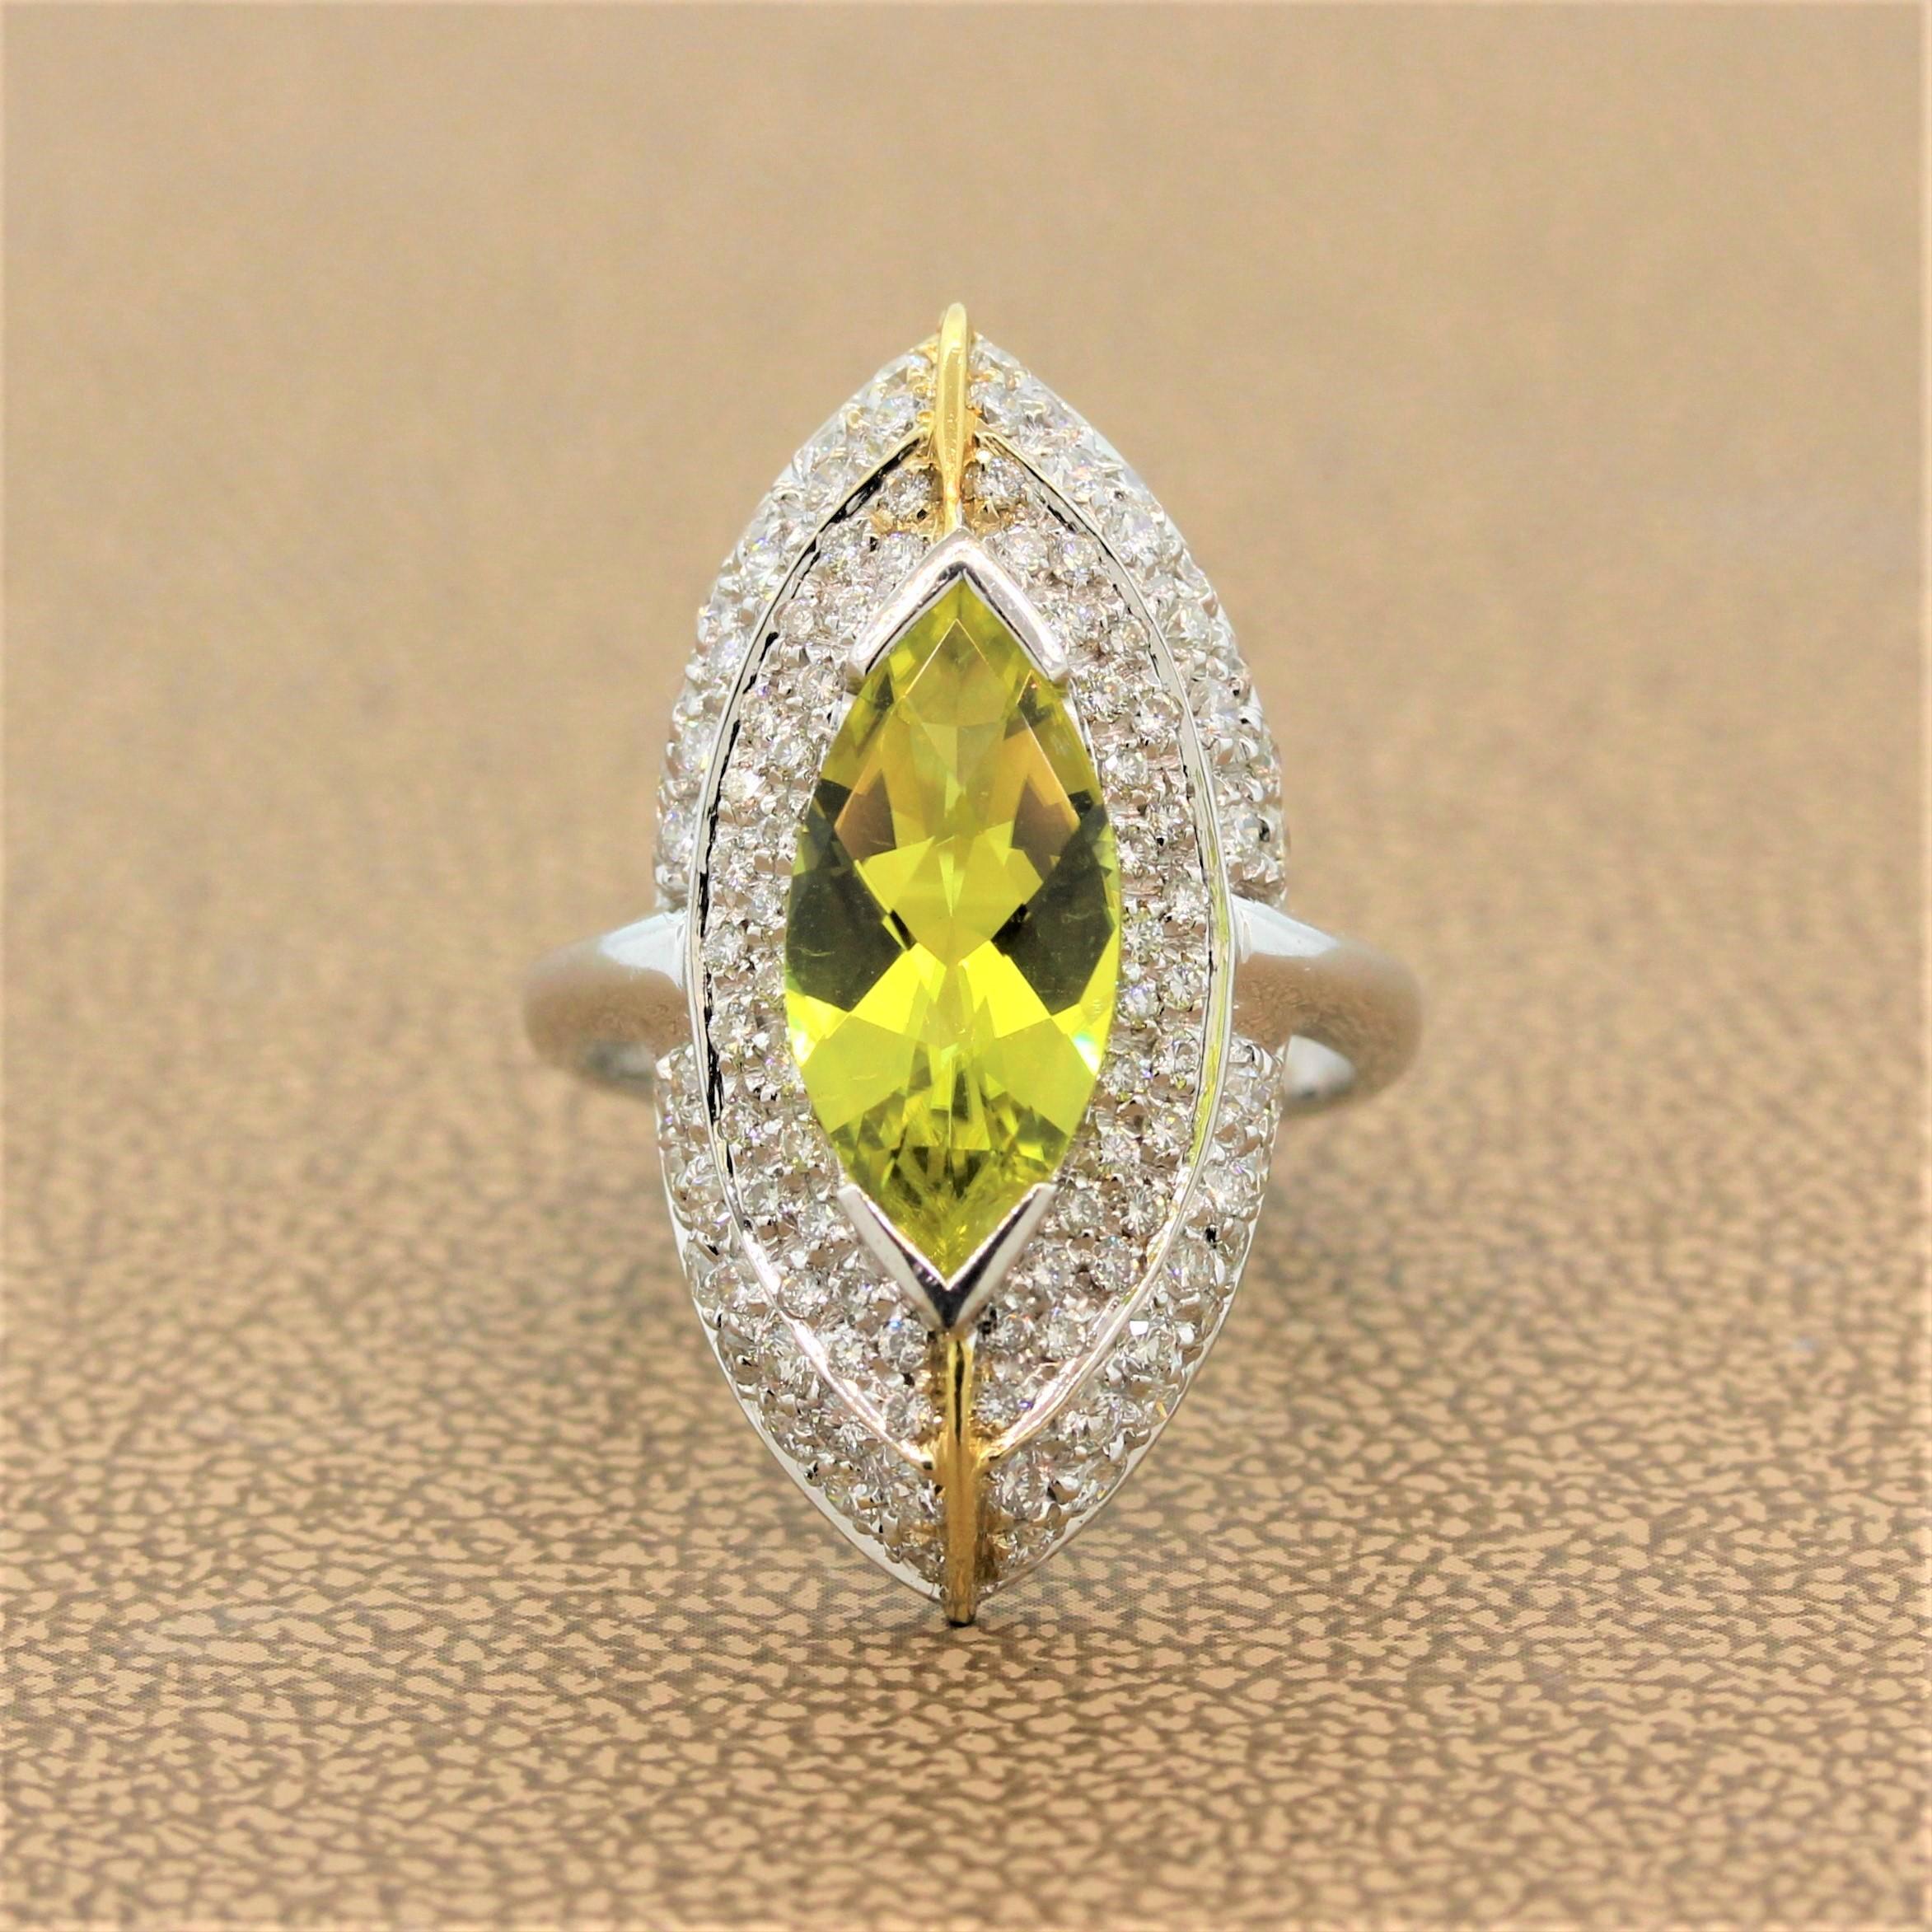 An Italian made navette ring featuring a 2.29 carat lemon quartz with a vibrant yellow color. The marquise cut lemon quartz is surrounded by 1.21 carats of round cut pave set diamonds in an 18K white gold setting with two stripes of 18K yellow gold